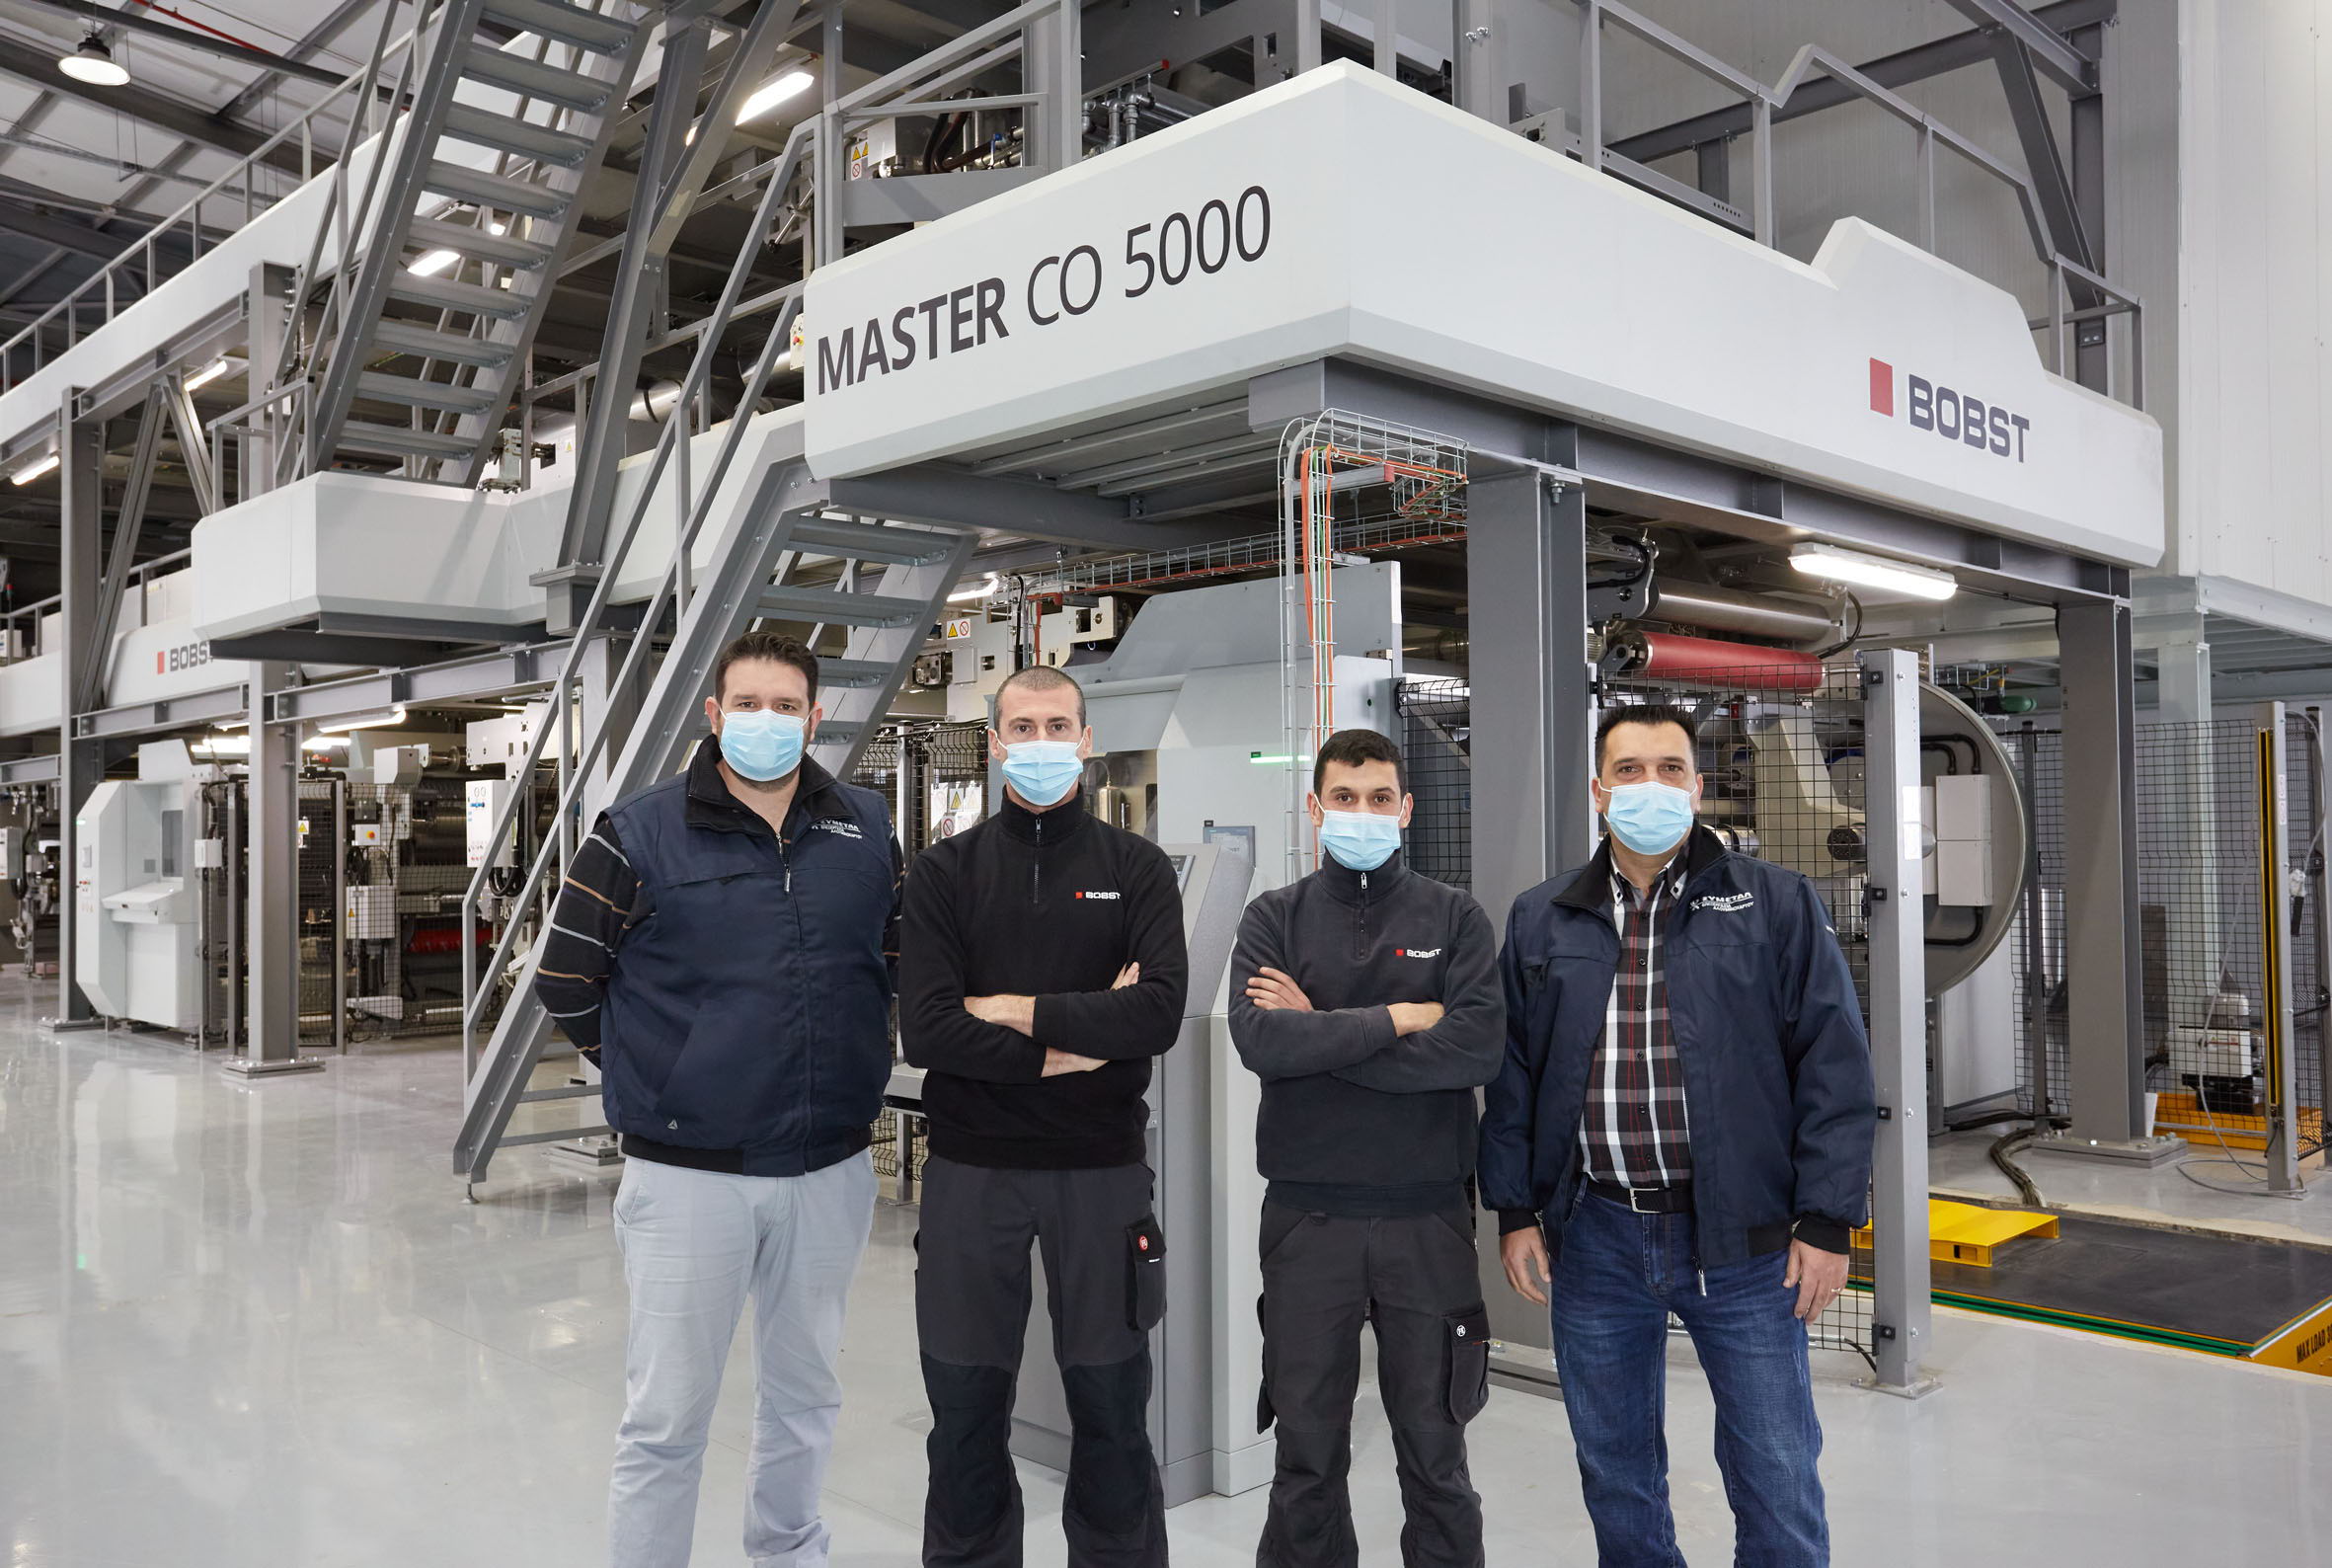 The Symetal and BOBST technical team (from left to right): Yannis Katsanakis, Project Manager and Electrical Maintenance Engineer, Symetal; Marco Girotto, Electrical Engineer, and Omar Houdaibi, Mechanical Engineer, Bobst Italia; Michalis Michalakis, Production Engineer, Symetal.